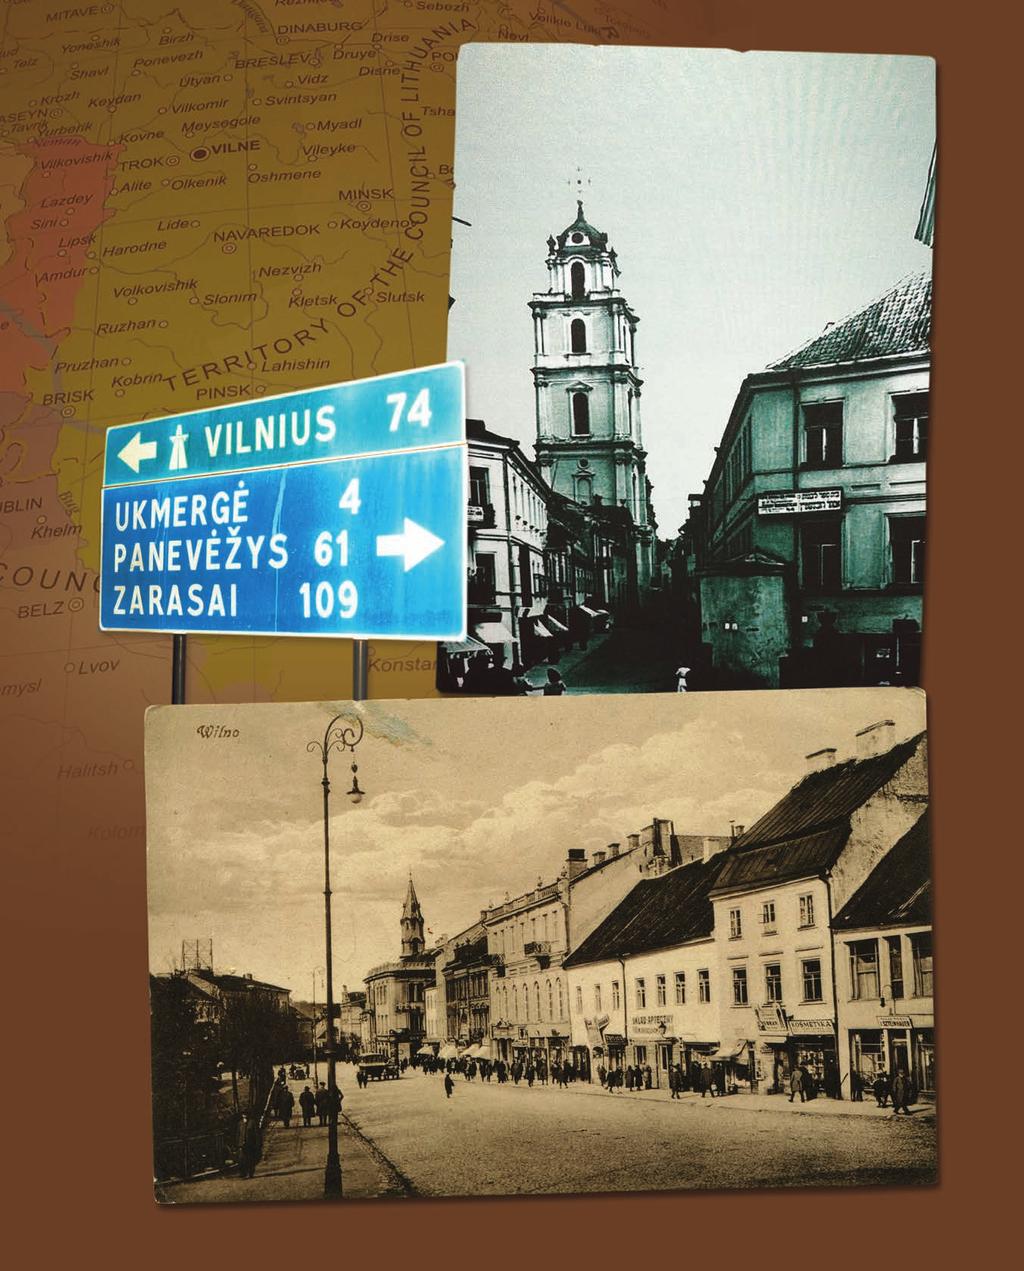 Feature 112112 p6-15 Lithuania.FS Complete.qxd 11/16/2012 11:23 AM Page 7 Gaon Street in Vilna, 1935.